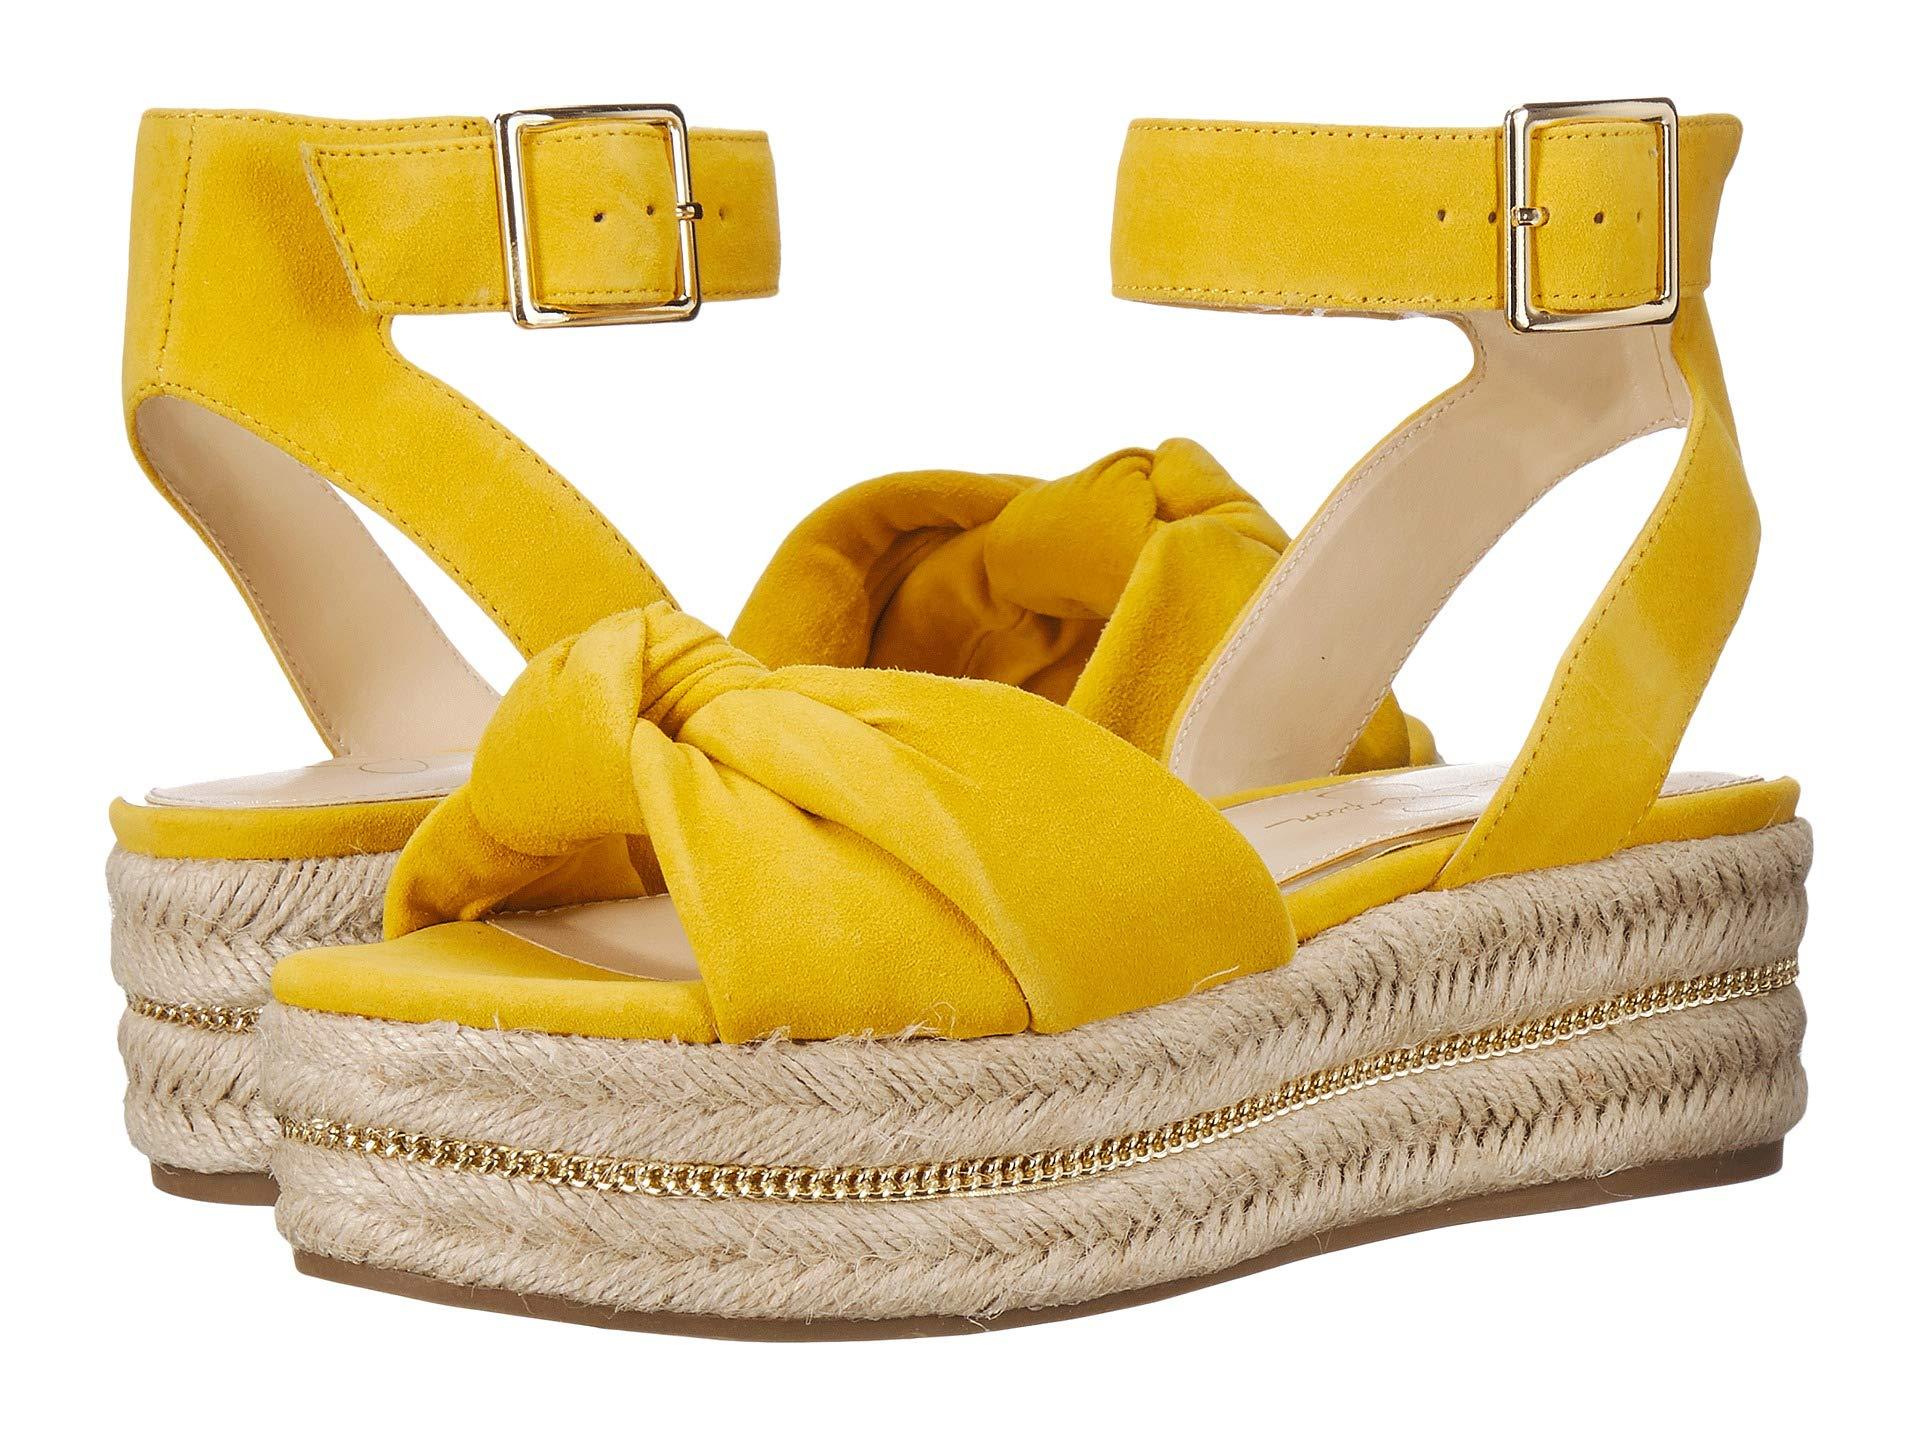 Jessica Simpson Aprille Wedge Sandal in Mustard Yellow Suede (Yellow ...